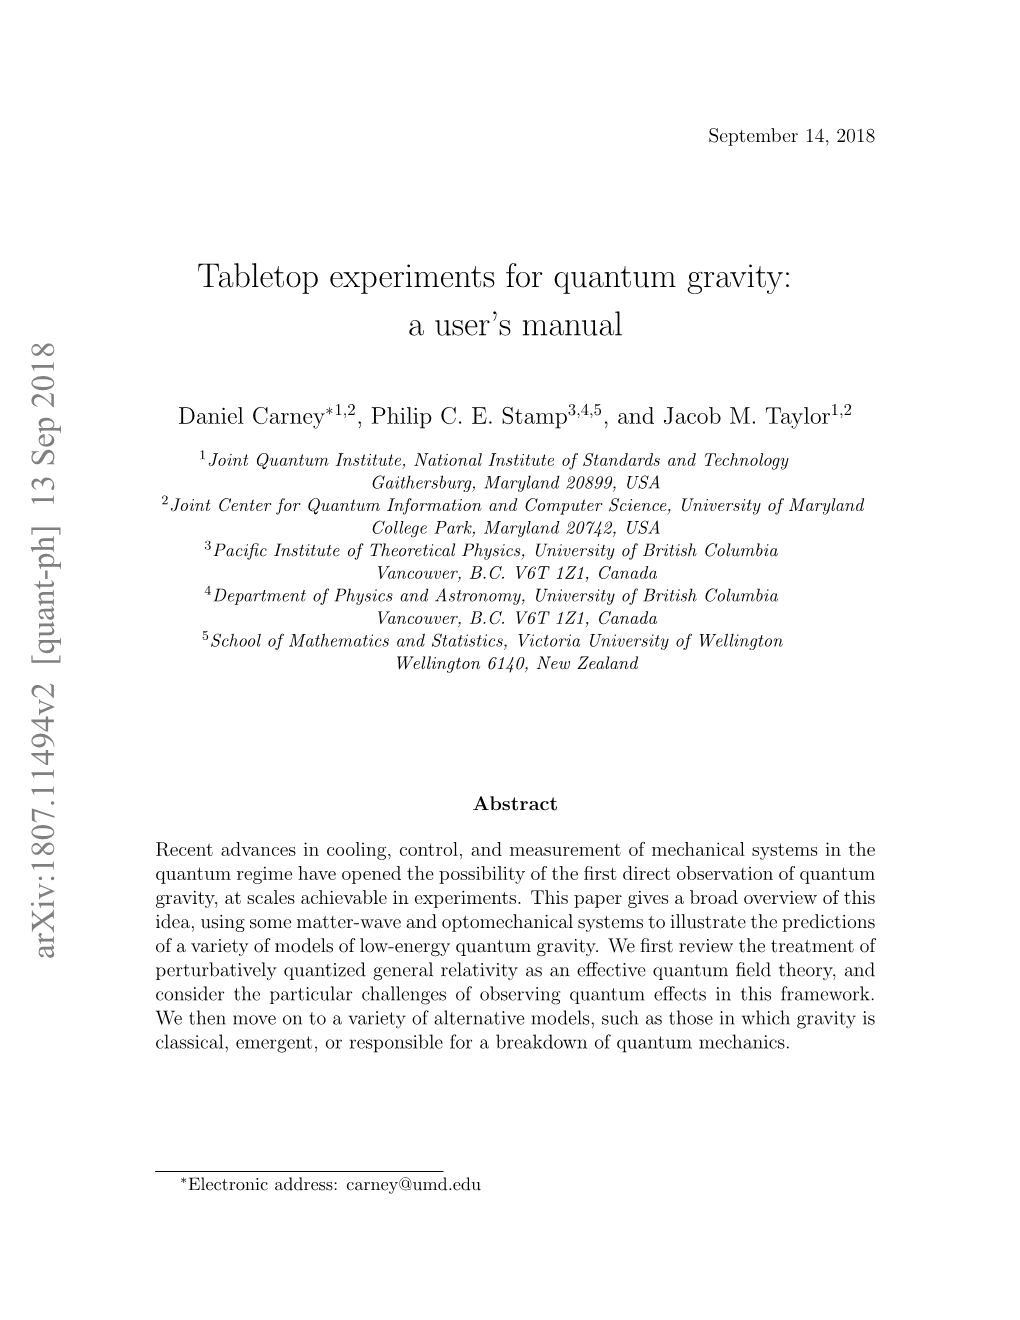 Tabletop Experiments for Quantum Gravity: a User's Manual Arxiv